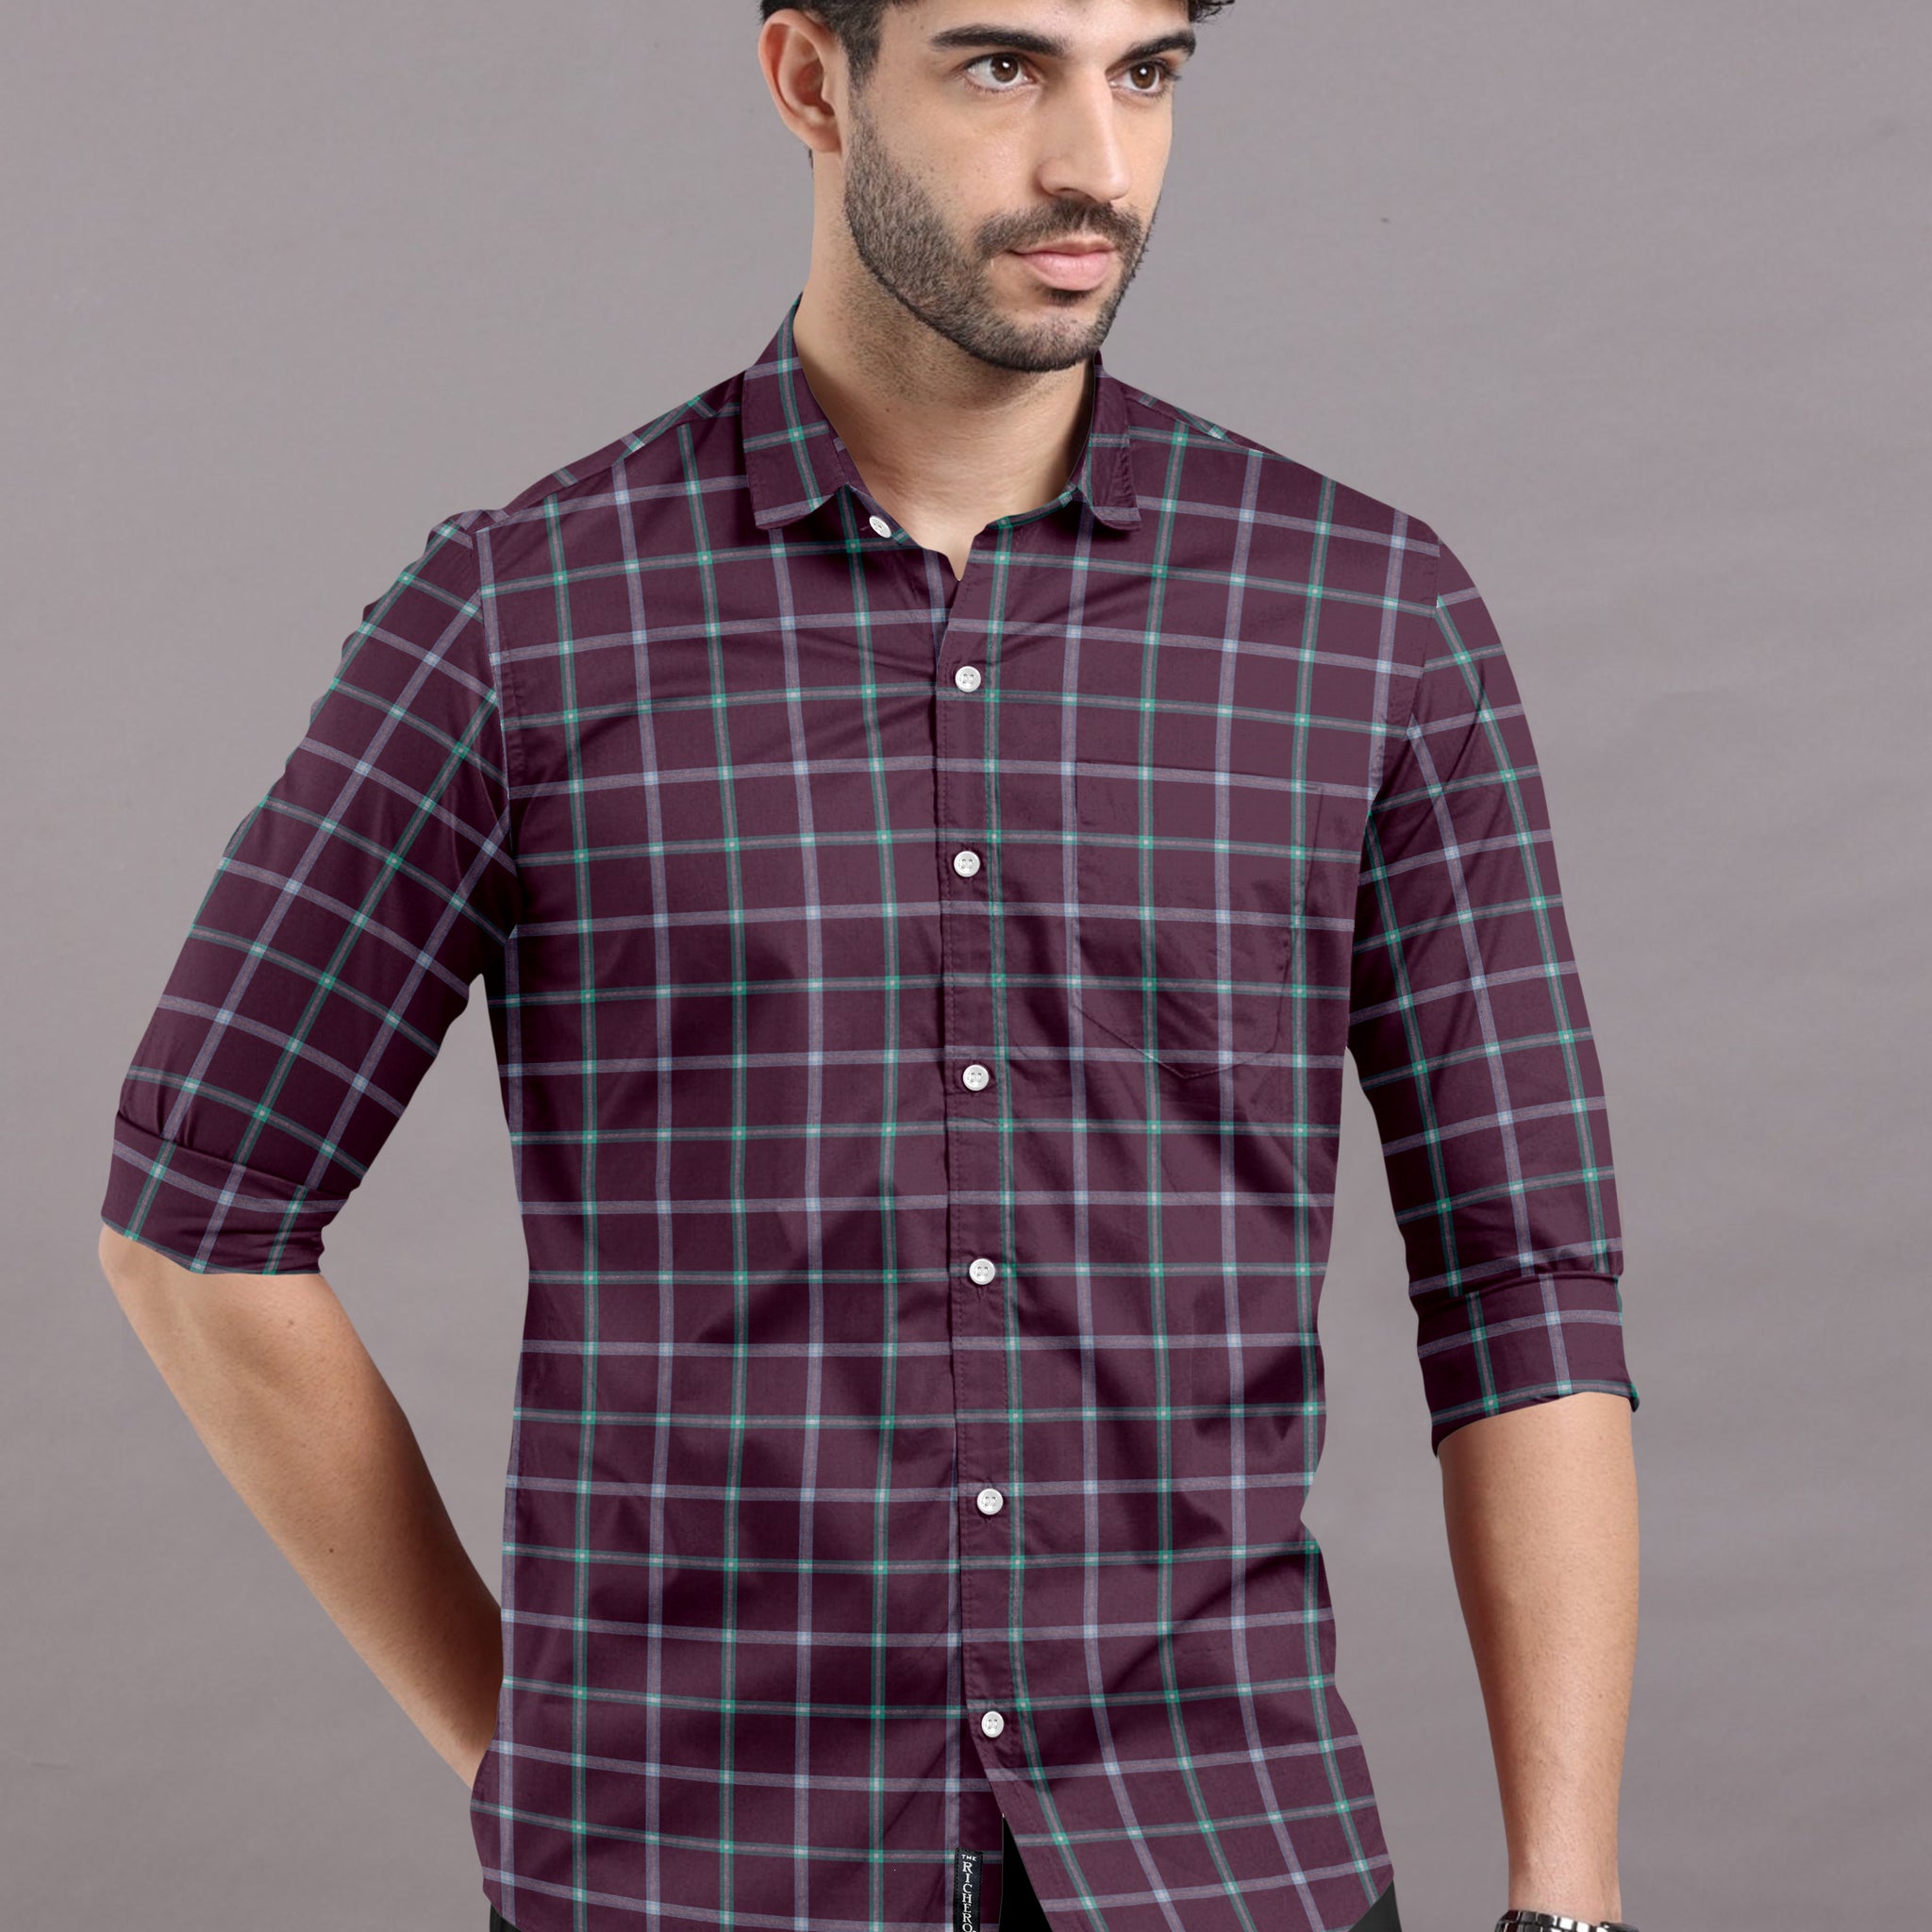 Appealing Maroon Chequered Shirt